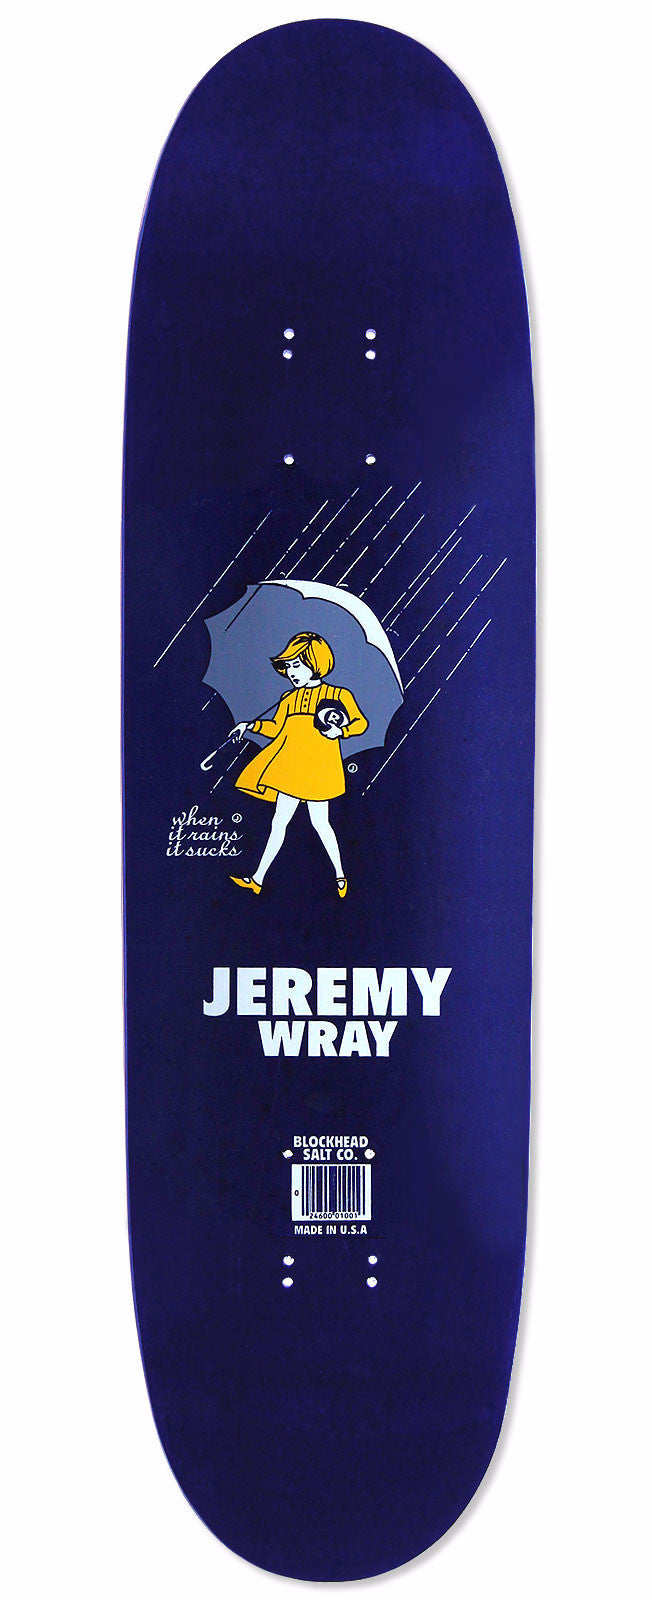 Jeremy Wray "rider" - SOLD OUT